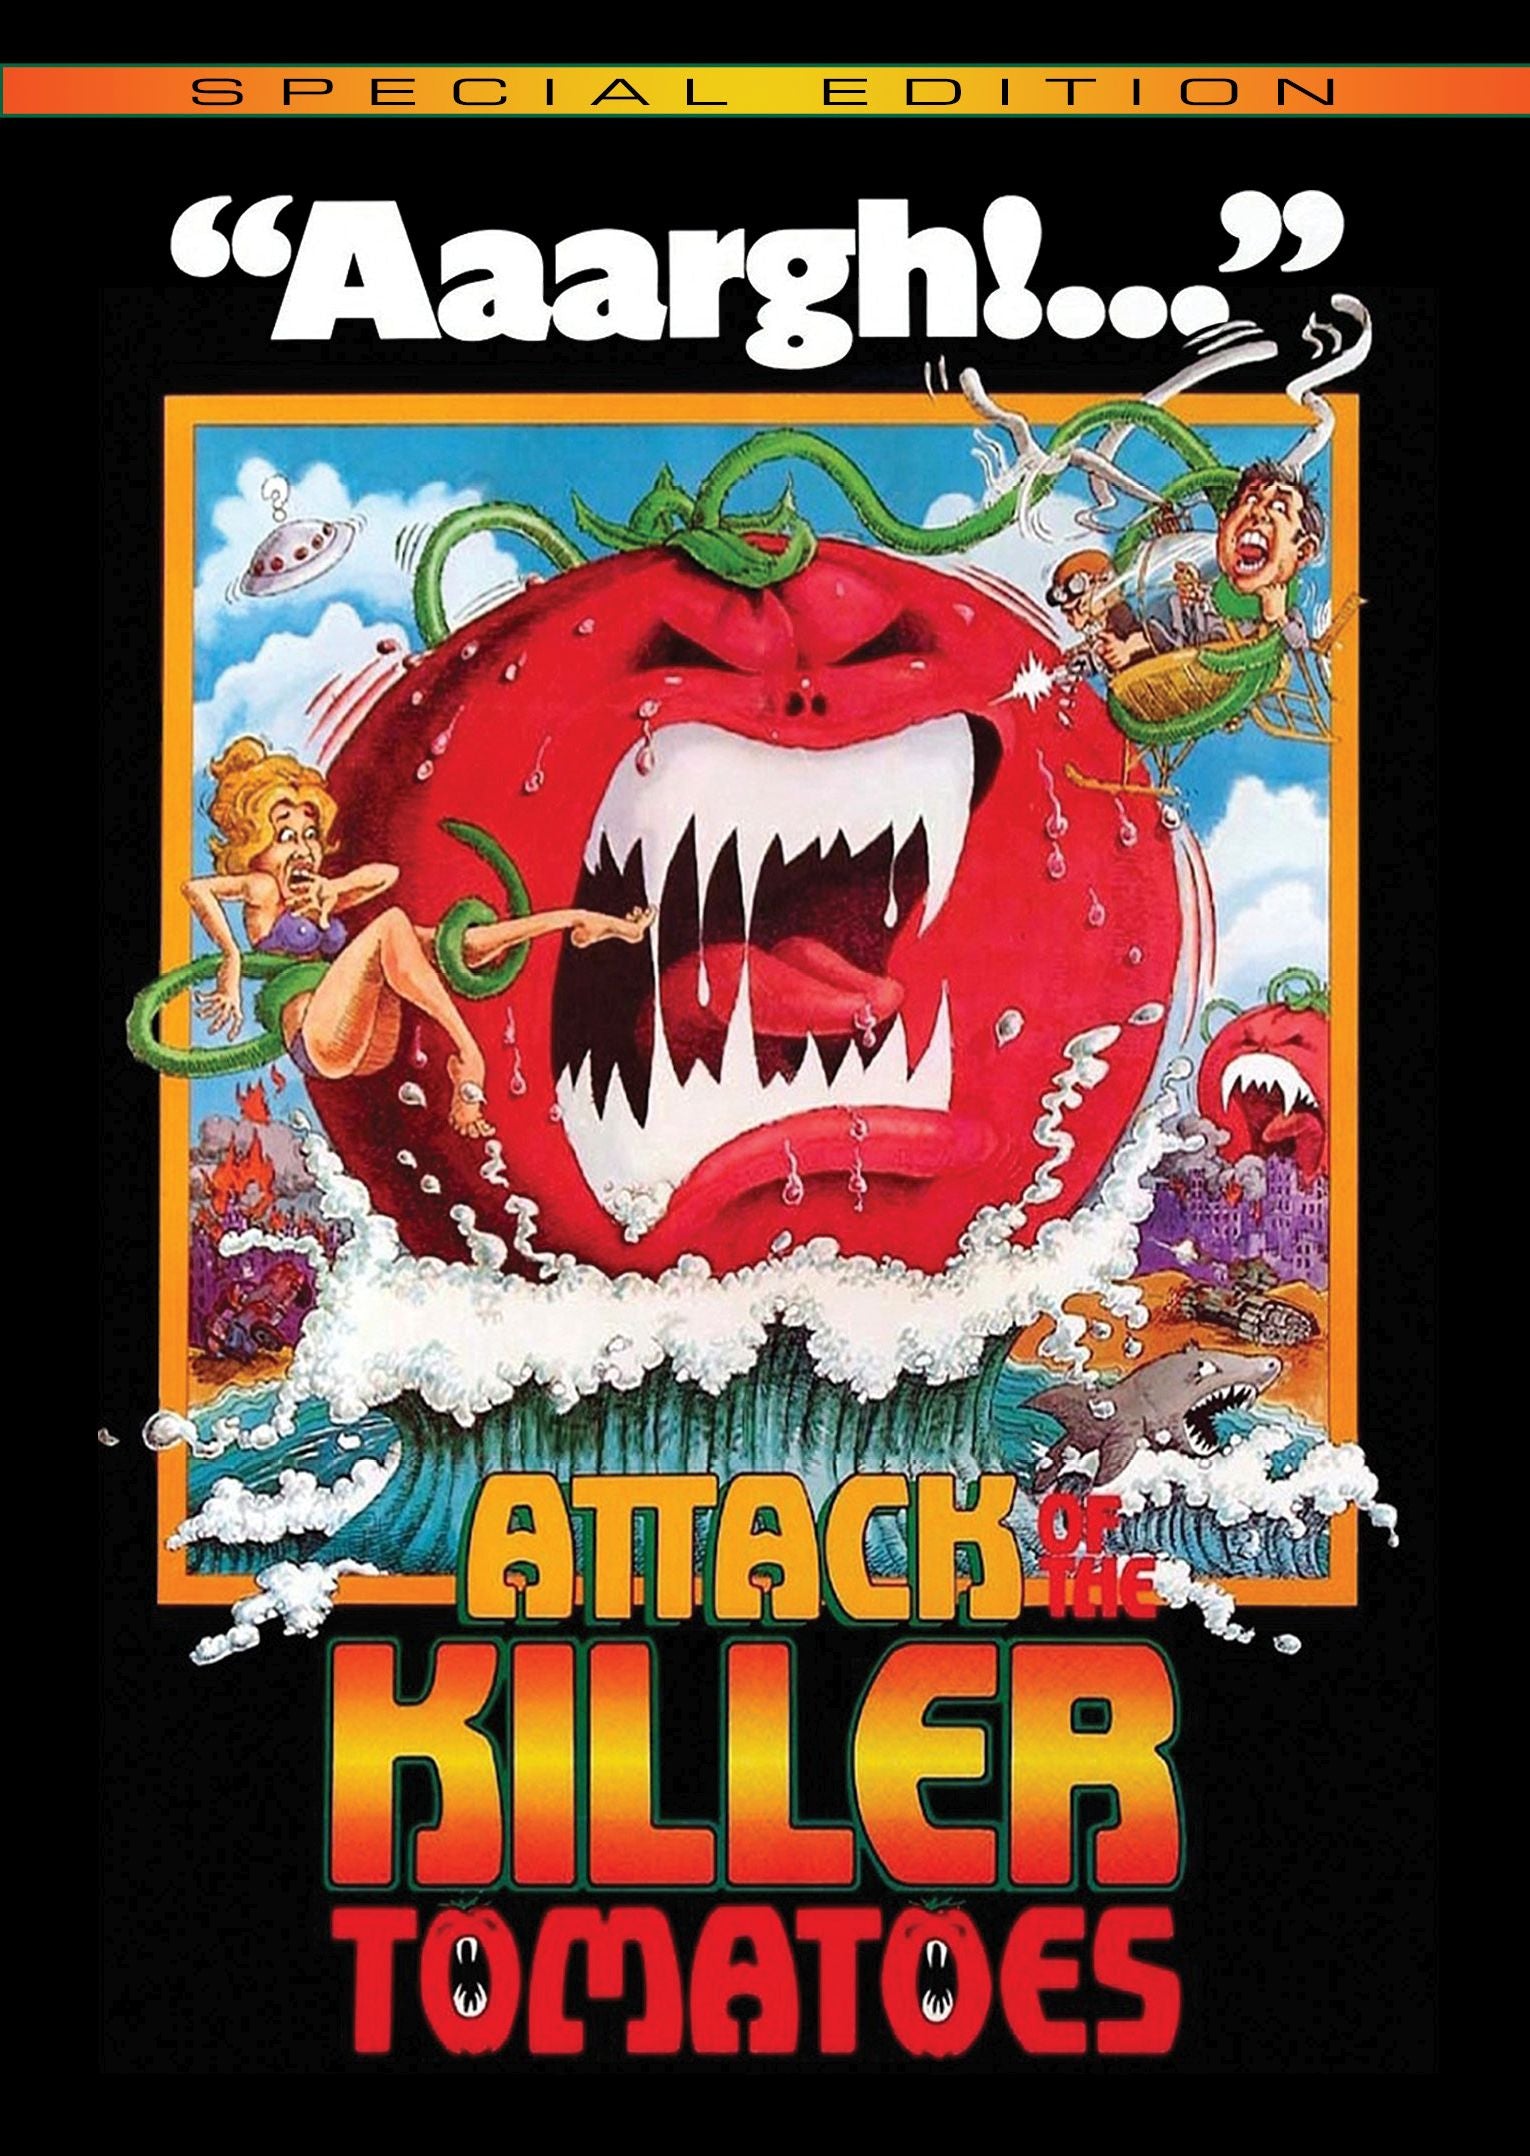 ATTACK OF THE KILLER TOMATOES DVD